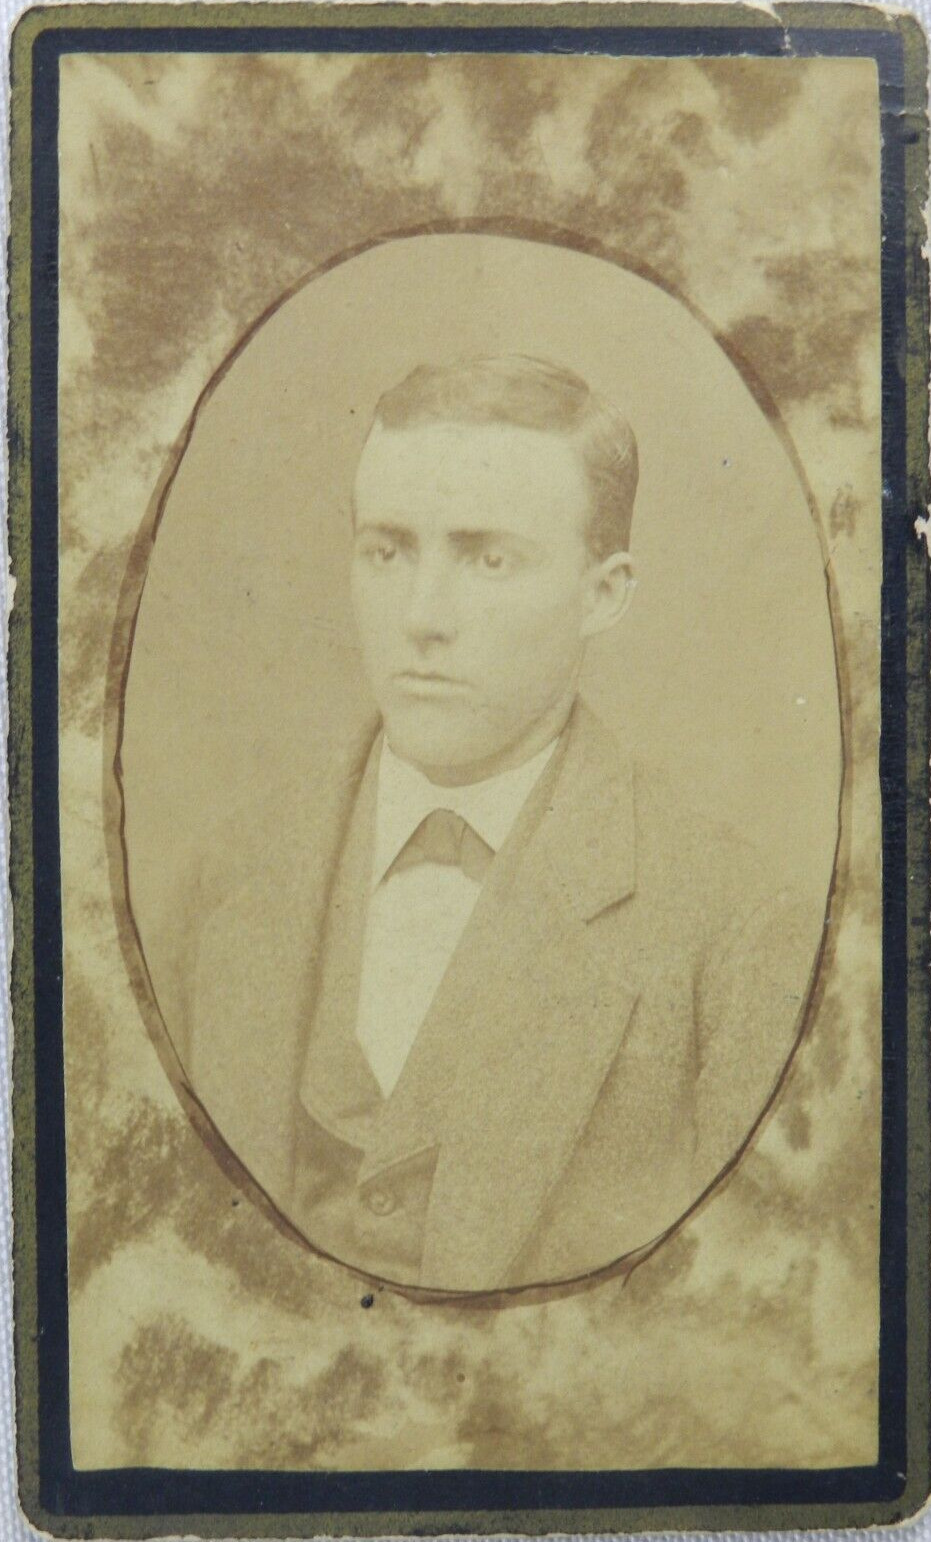 Young Man in Formal Suit Bordered Portrait - Elmwood, IL - c.1900s Cabinet Card